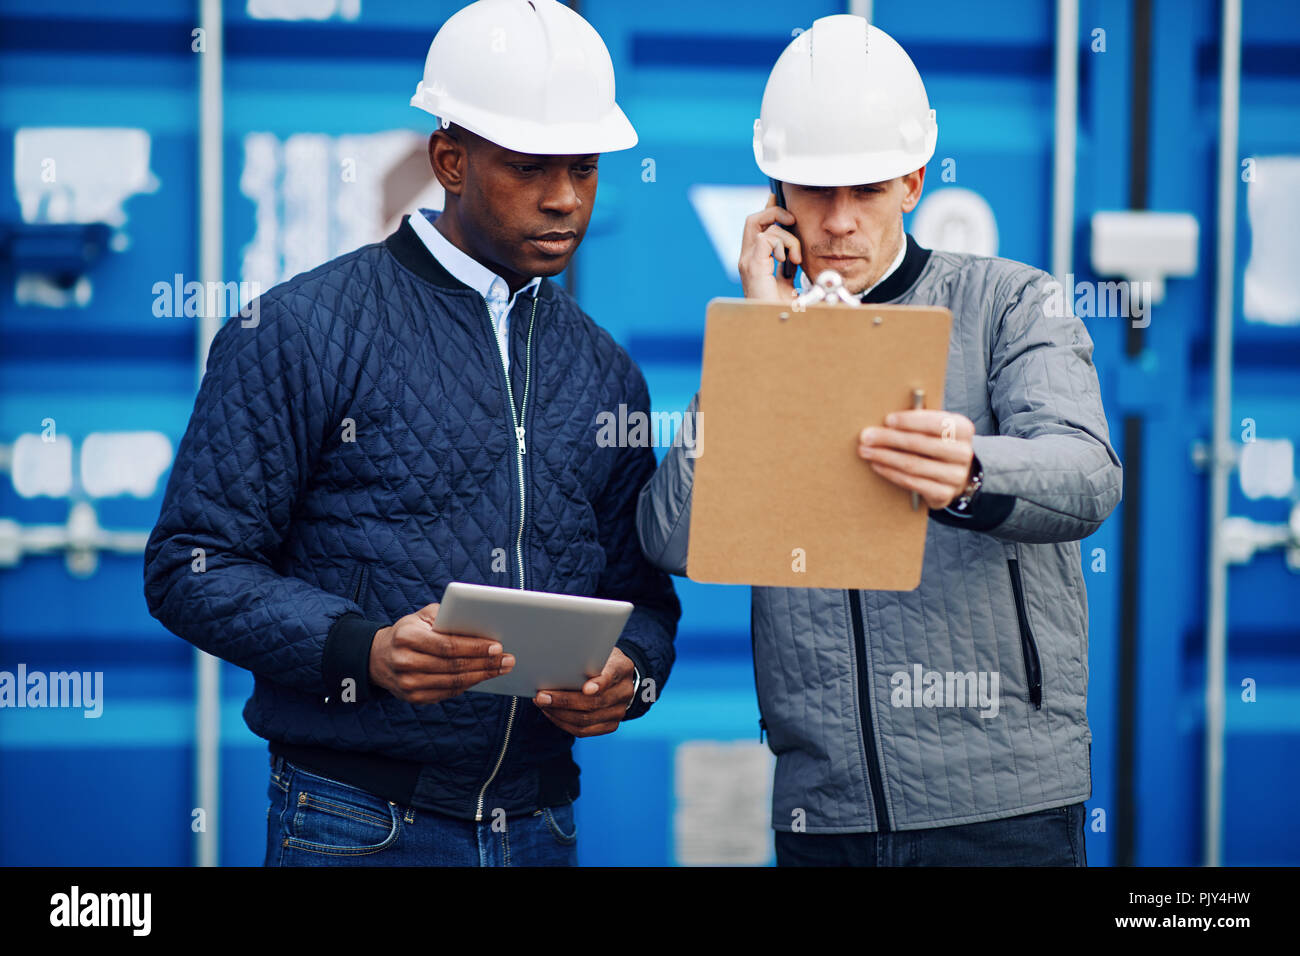 Freight foreman talking on a cellphone and reading an inventory list on a clipboard while standing with a colleague in a commercial shipping yard Stock Photo